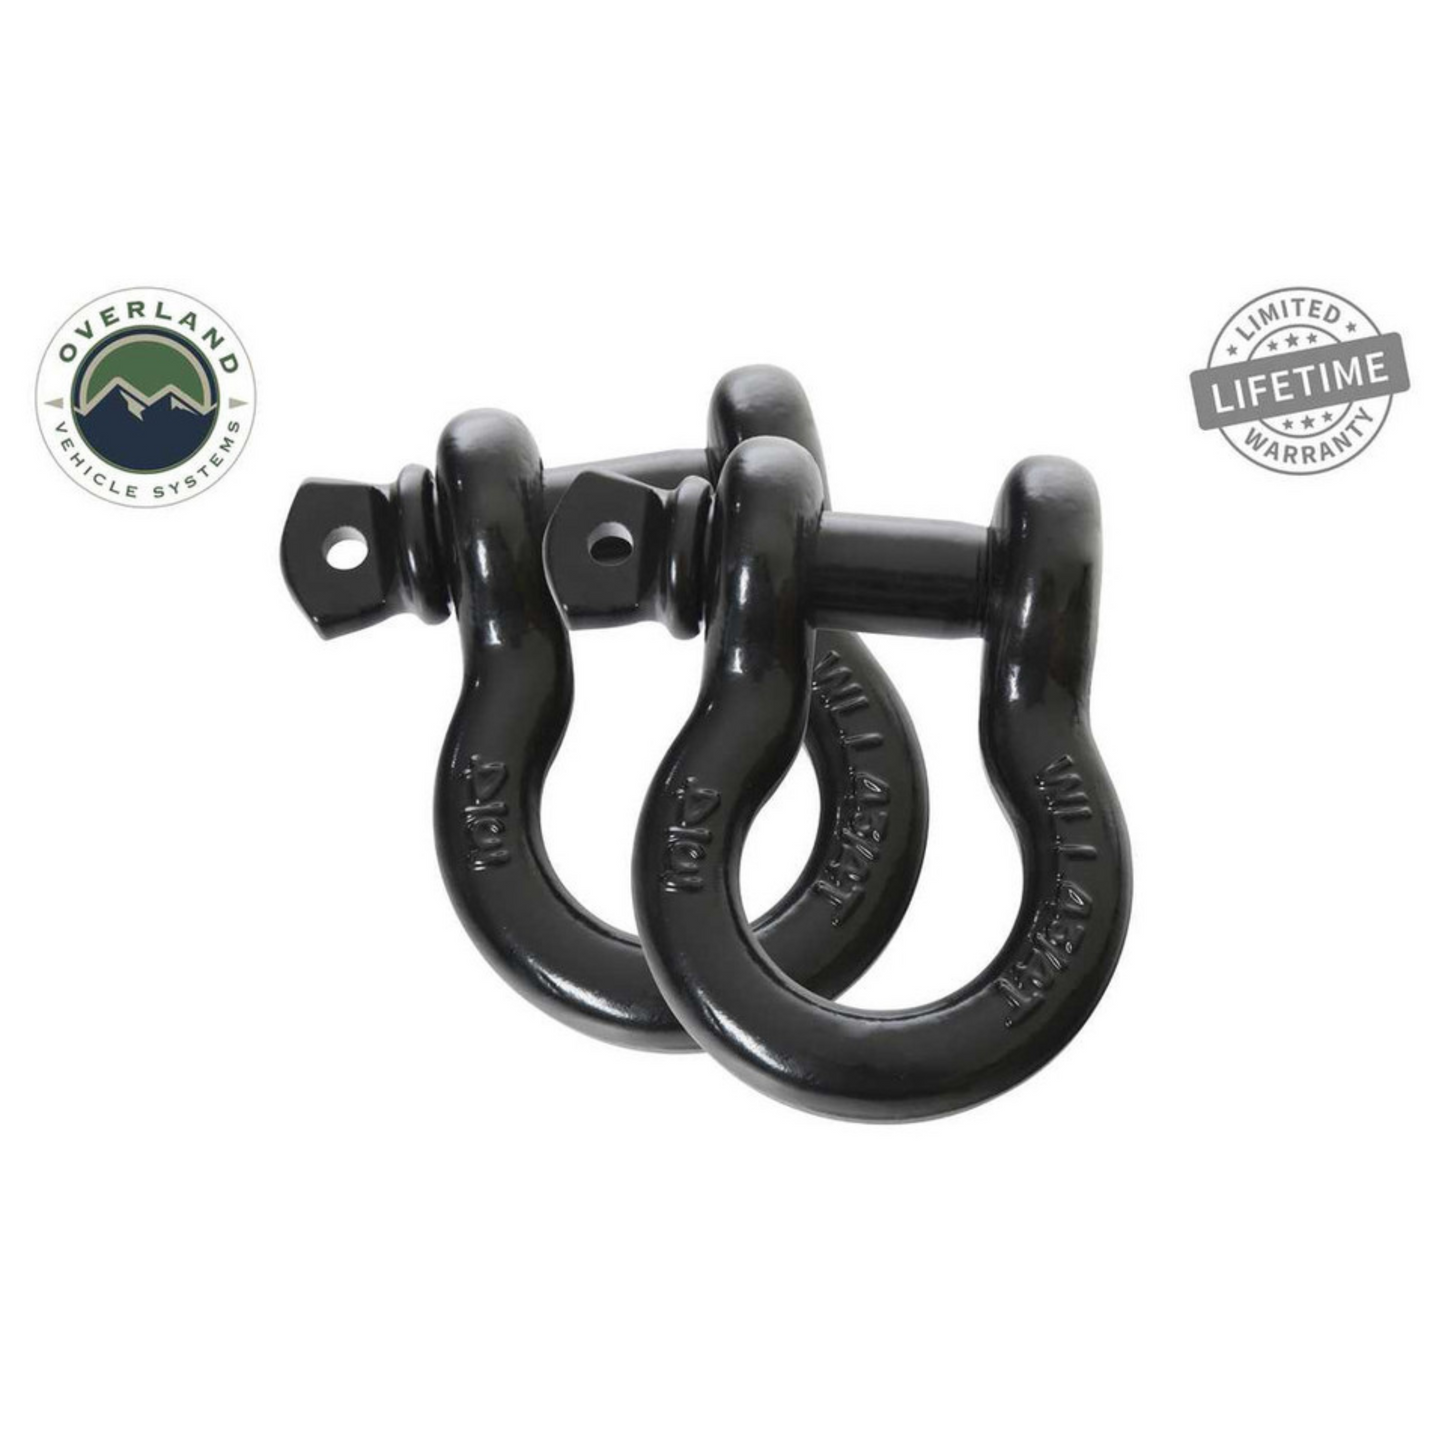 Heavy Duty 3/4" D-Ring Recovery Shackle - Black Pair